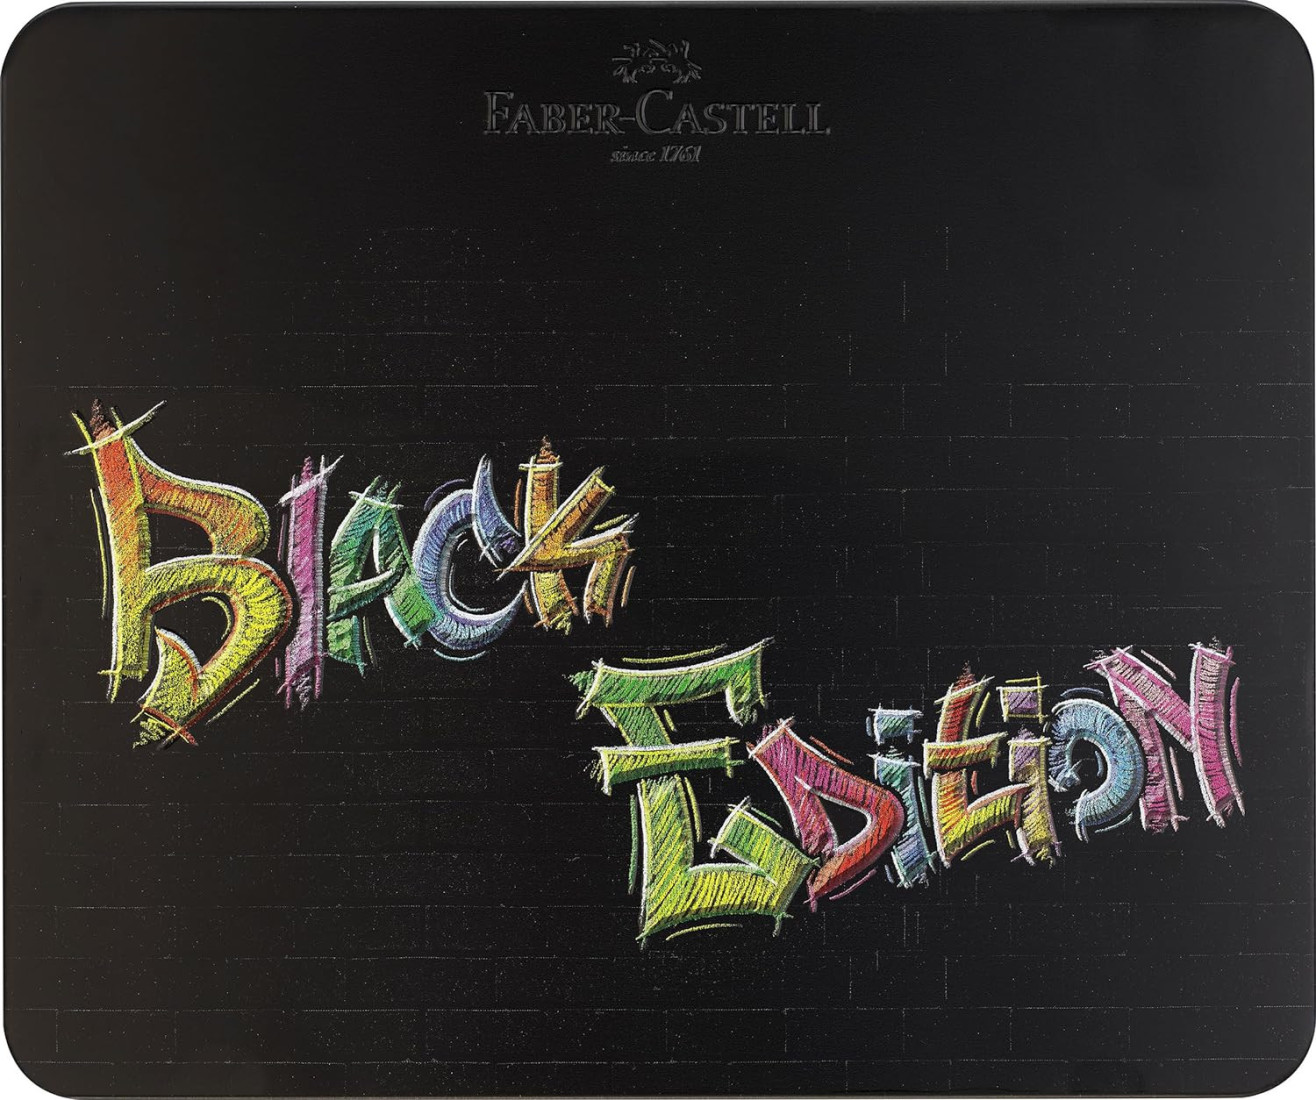 Faber Castell Black Edition 116490 Colouring Pencils, 100 Metal Case, Shatterproof, for Children and Adults